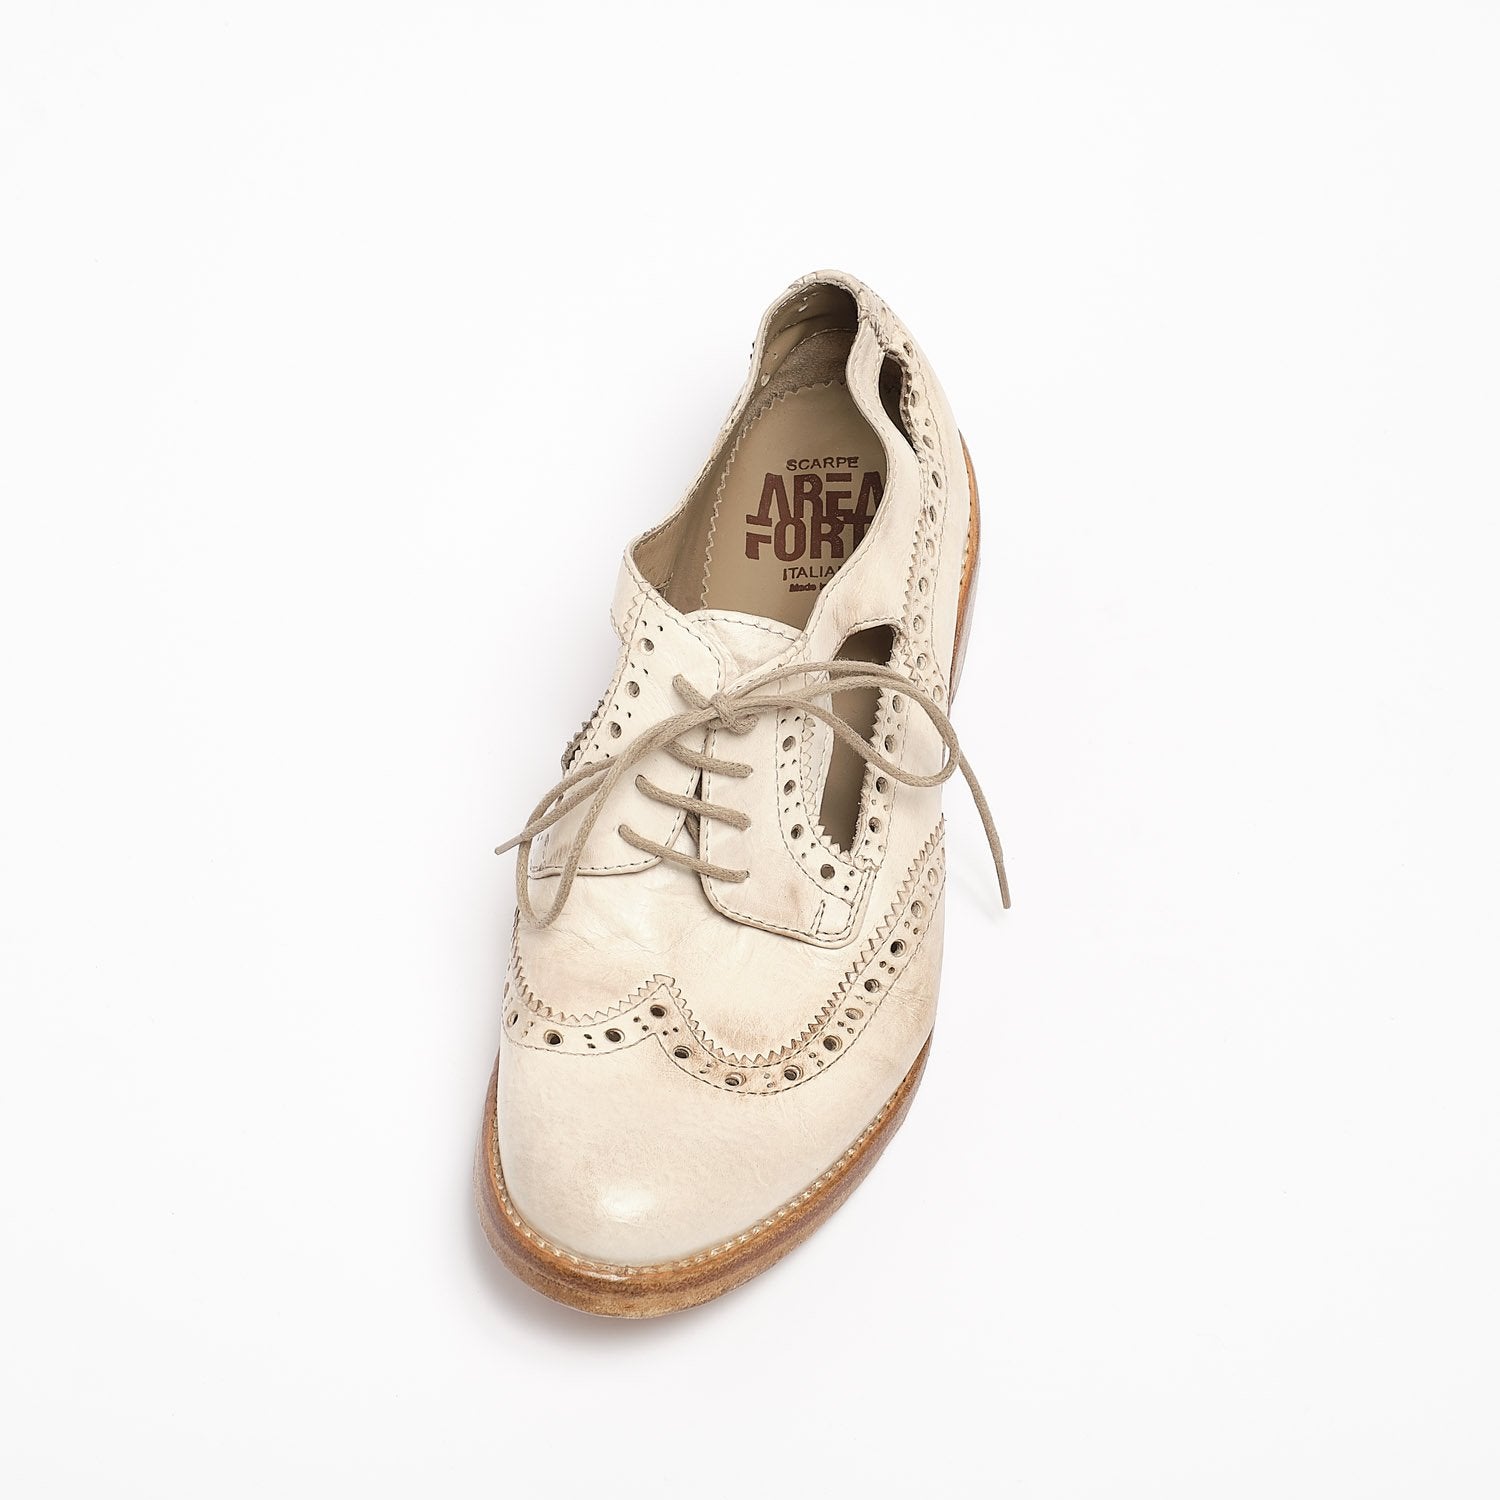 Madeline Laced side open Shoes natural vacchetta leather ivory